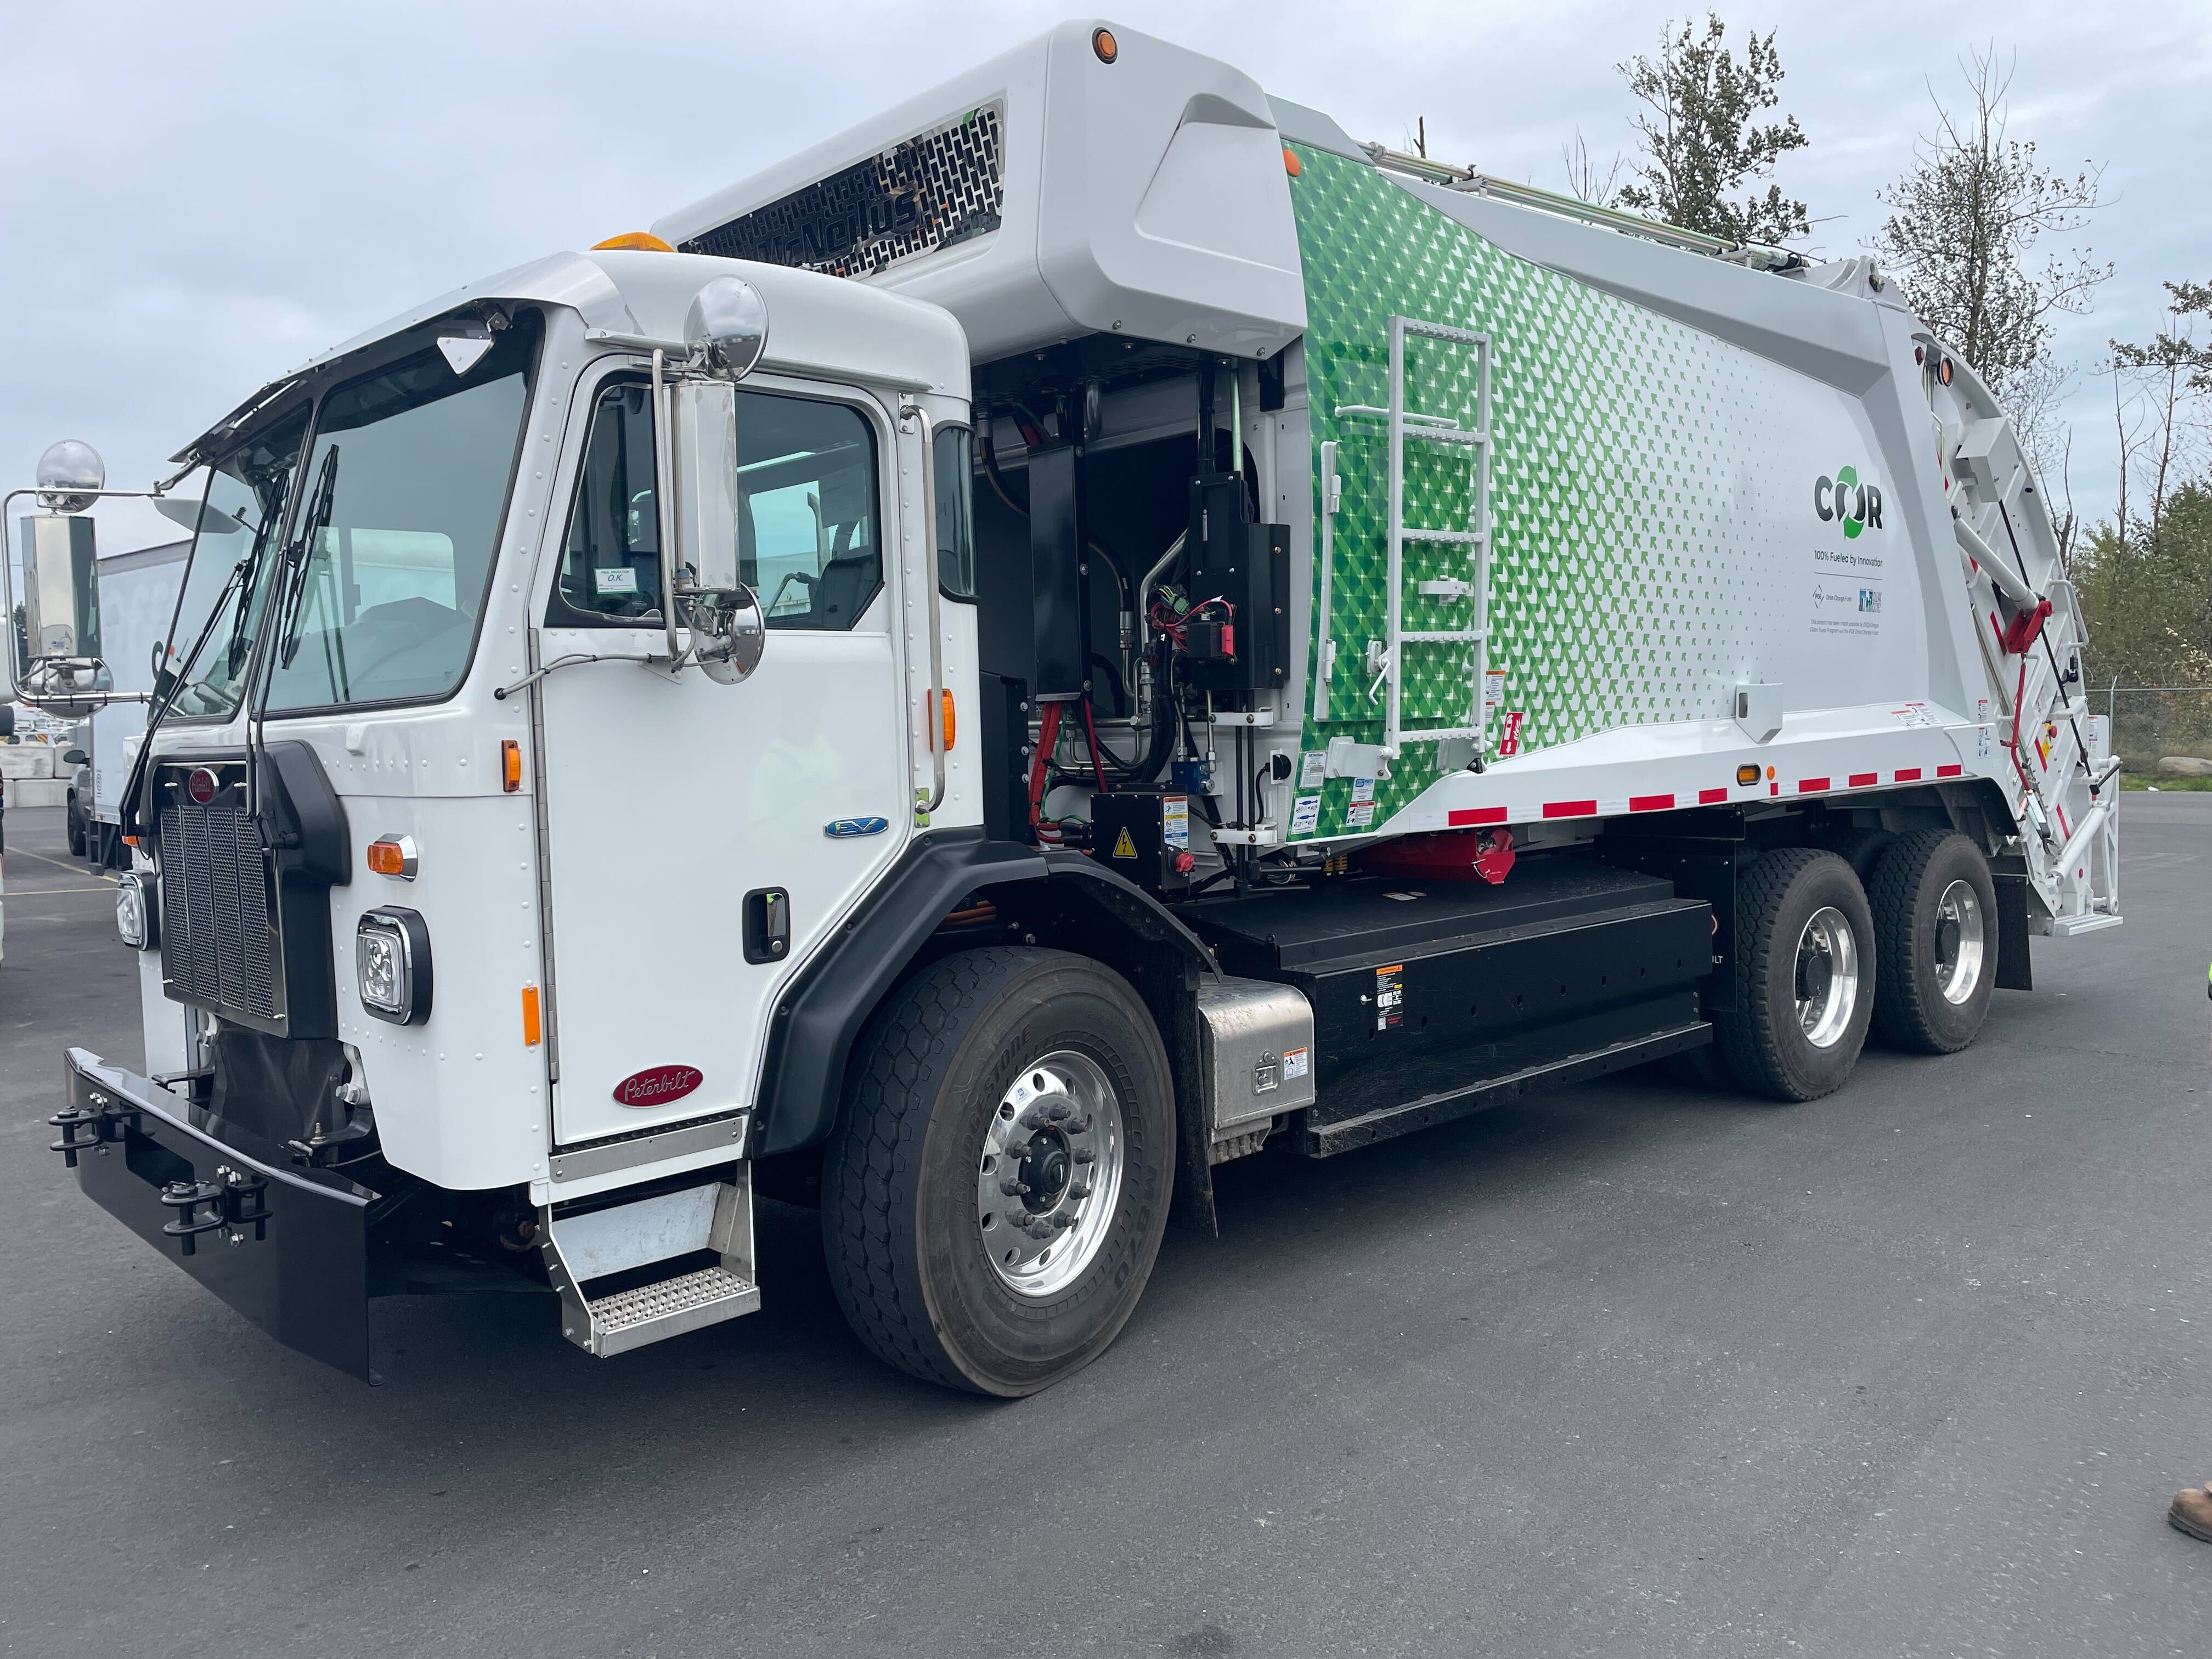 soon truck streets garbage Portland\'s OPB electric - eastside will first hit